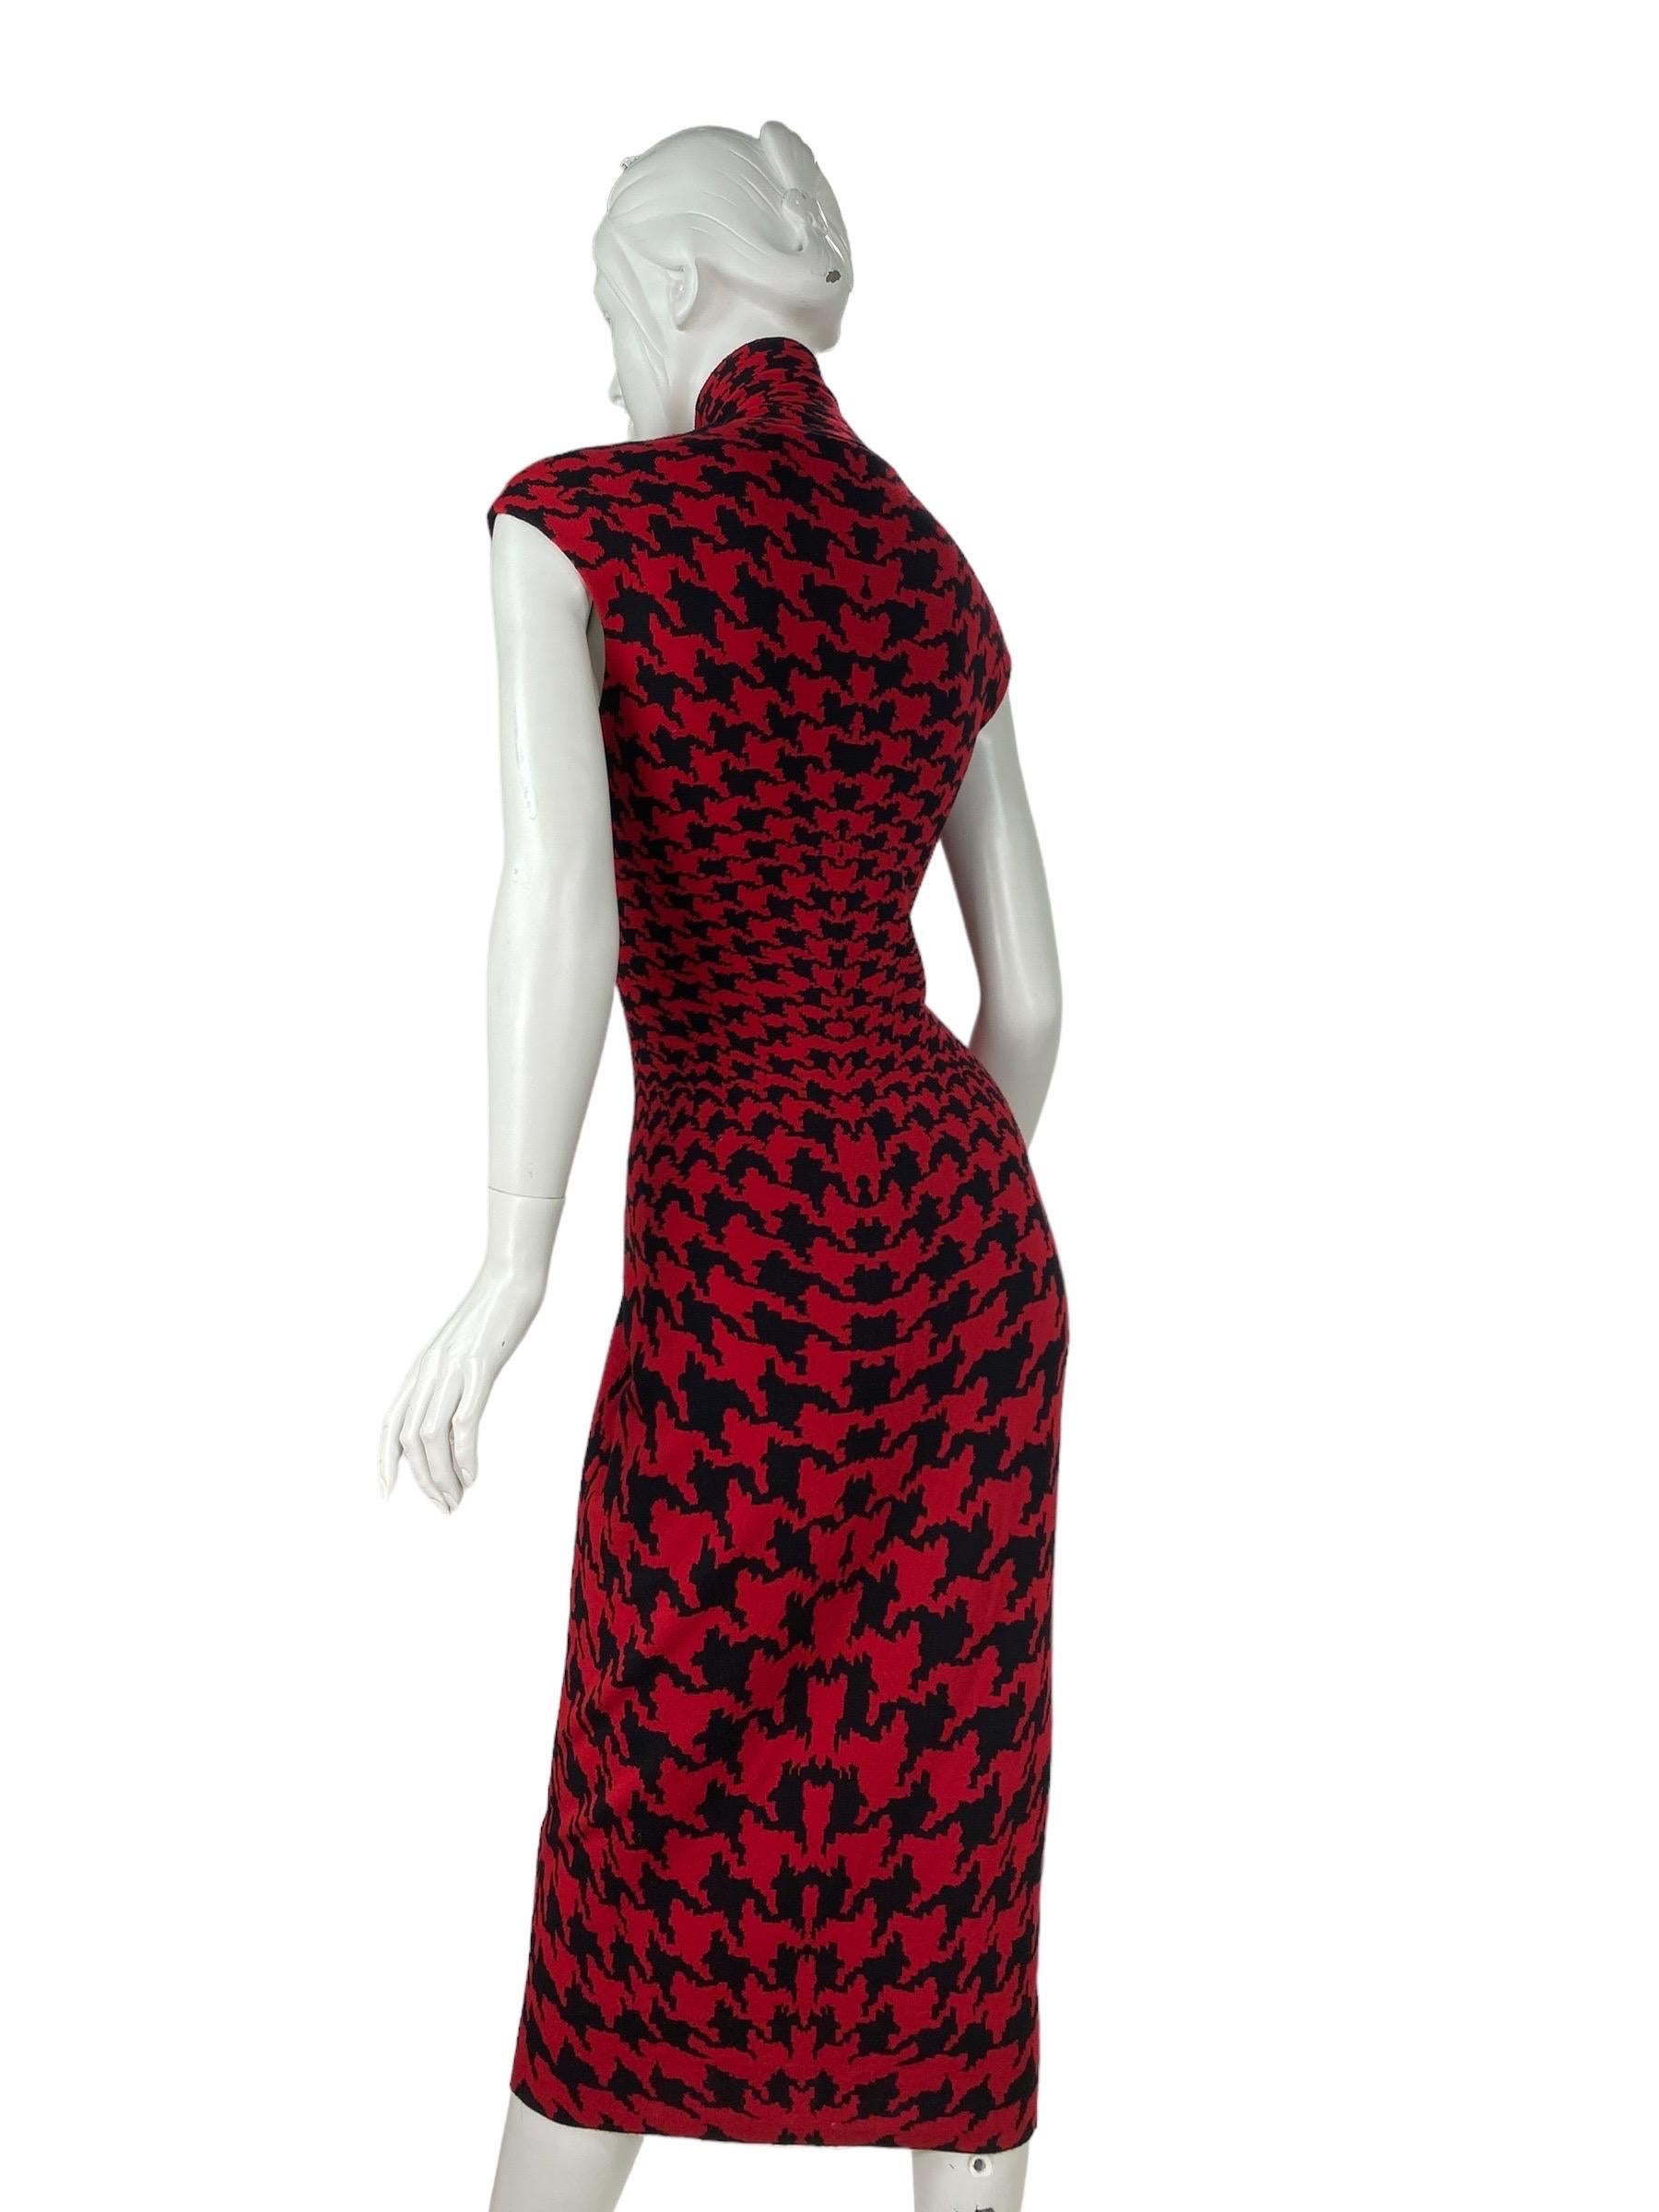 F/W 2009 Iconic Alexander Mcqueen houndstooth print knit dress  For Sale 2